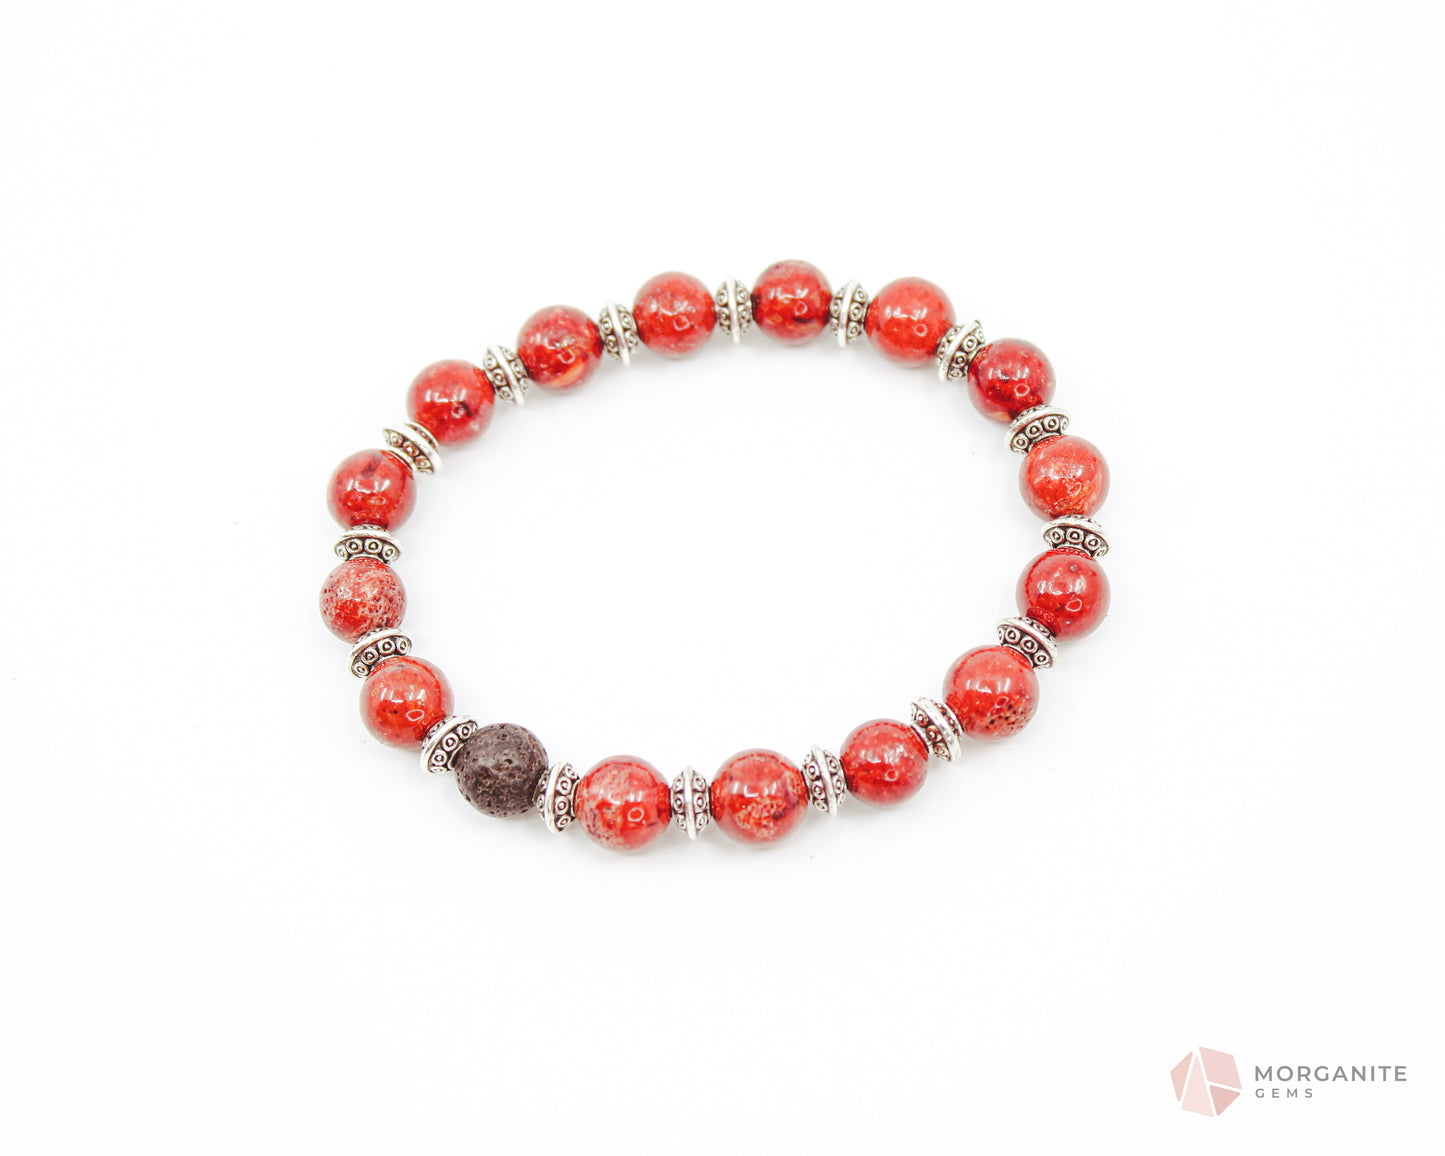 Red Coral and Lava Bracelet